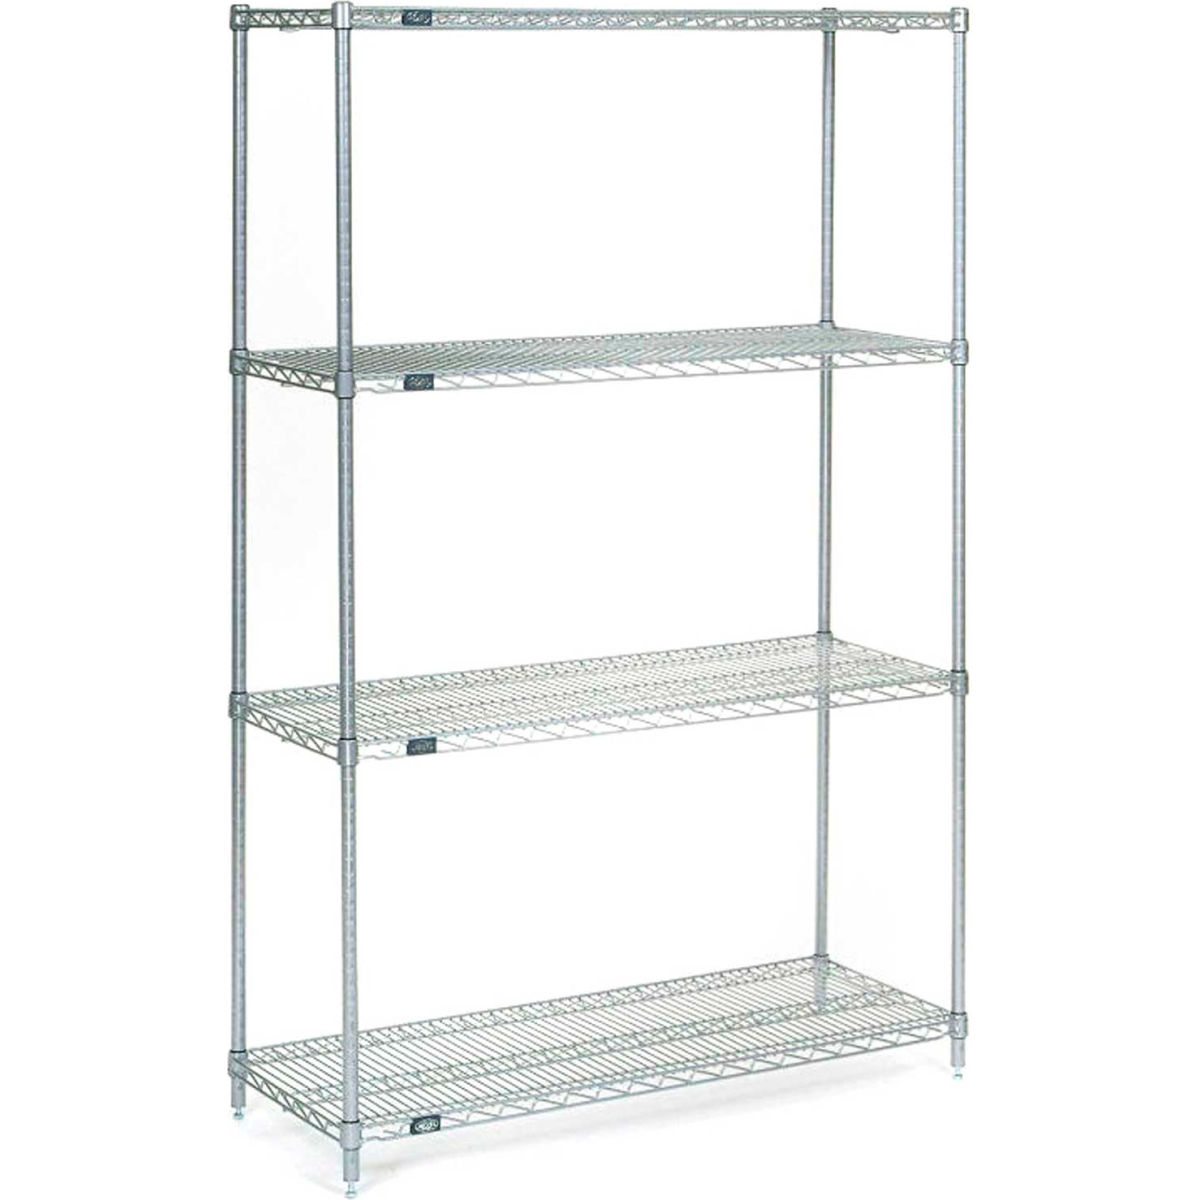 Picture of Global Industrial 14427S 74 x 42 x 14 in. Nexel Stainless Steel Starter Wire Shelving